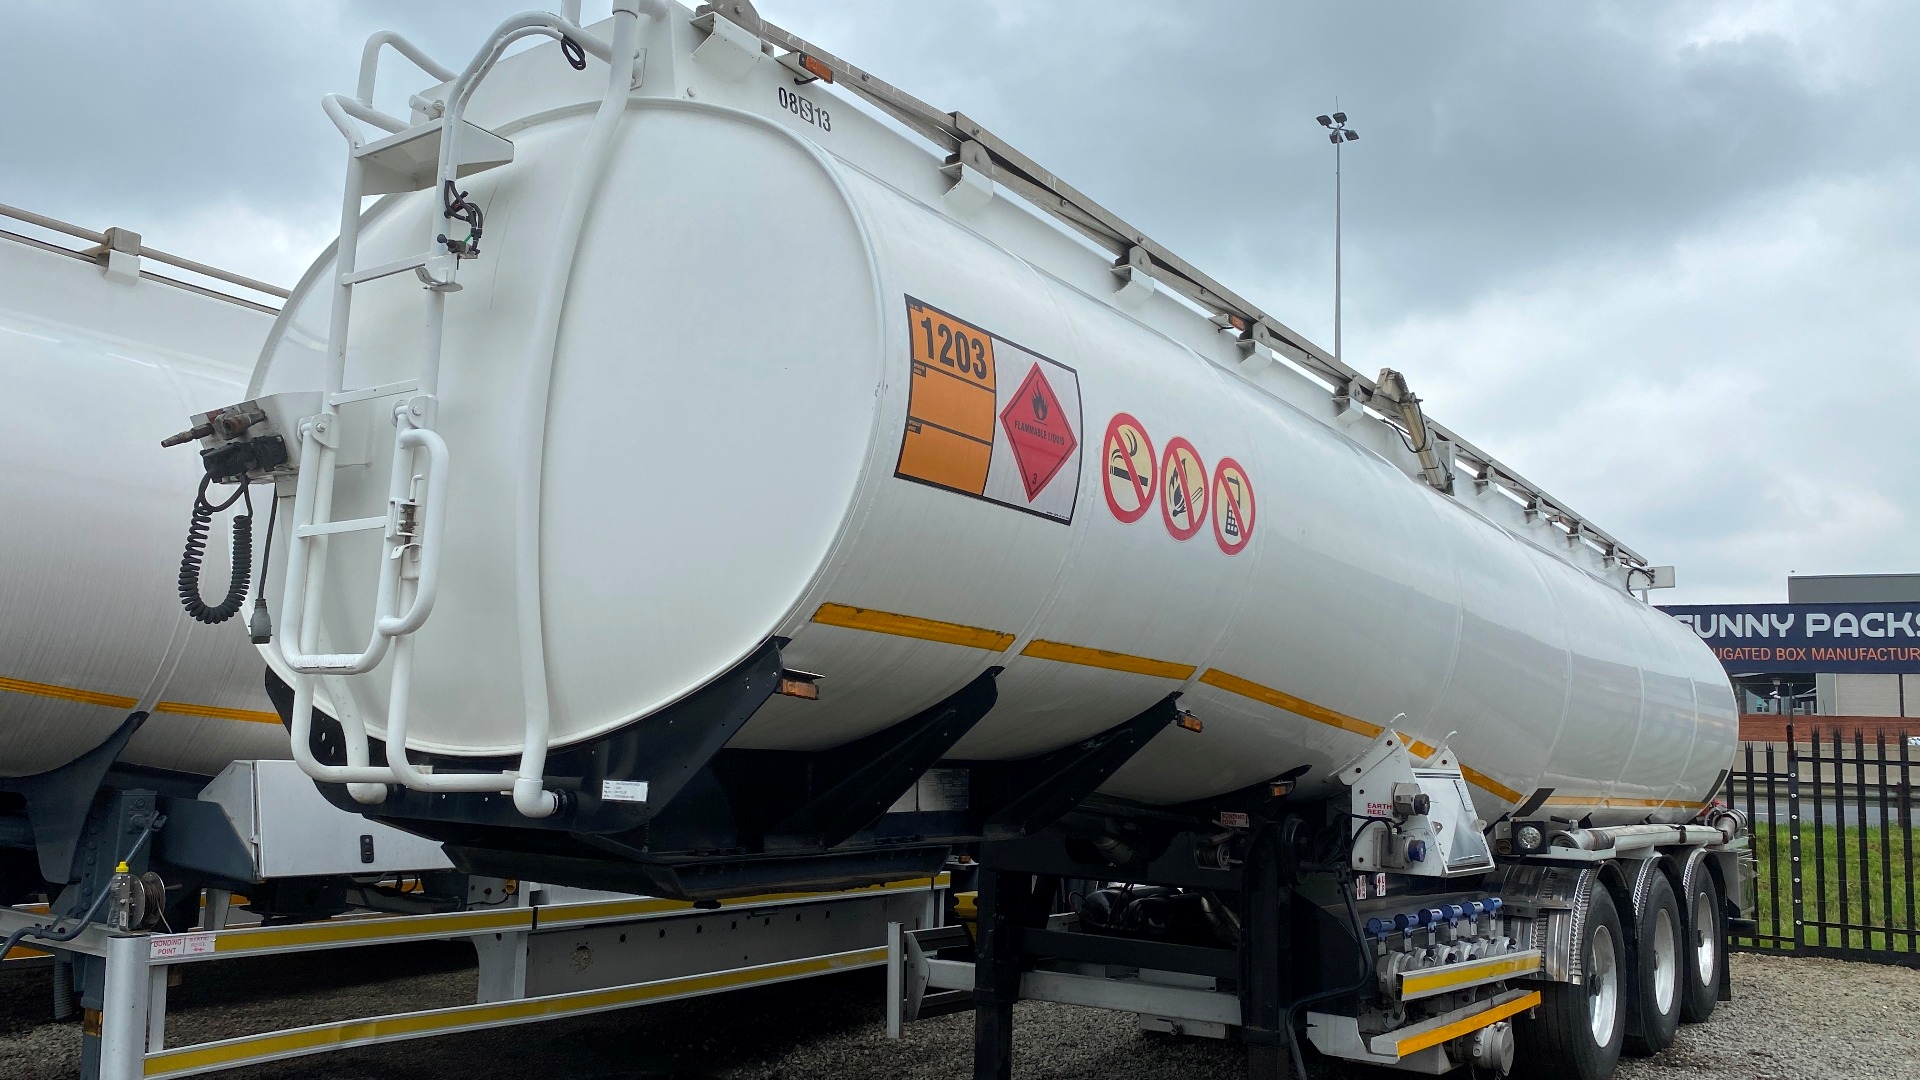 GRW Fuel tanker 2008   39 000 GRW Litres Fuel Tanker 2008 for sale by Manmar Truck And Trailer | Truck & Trailer Marketplaces